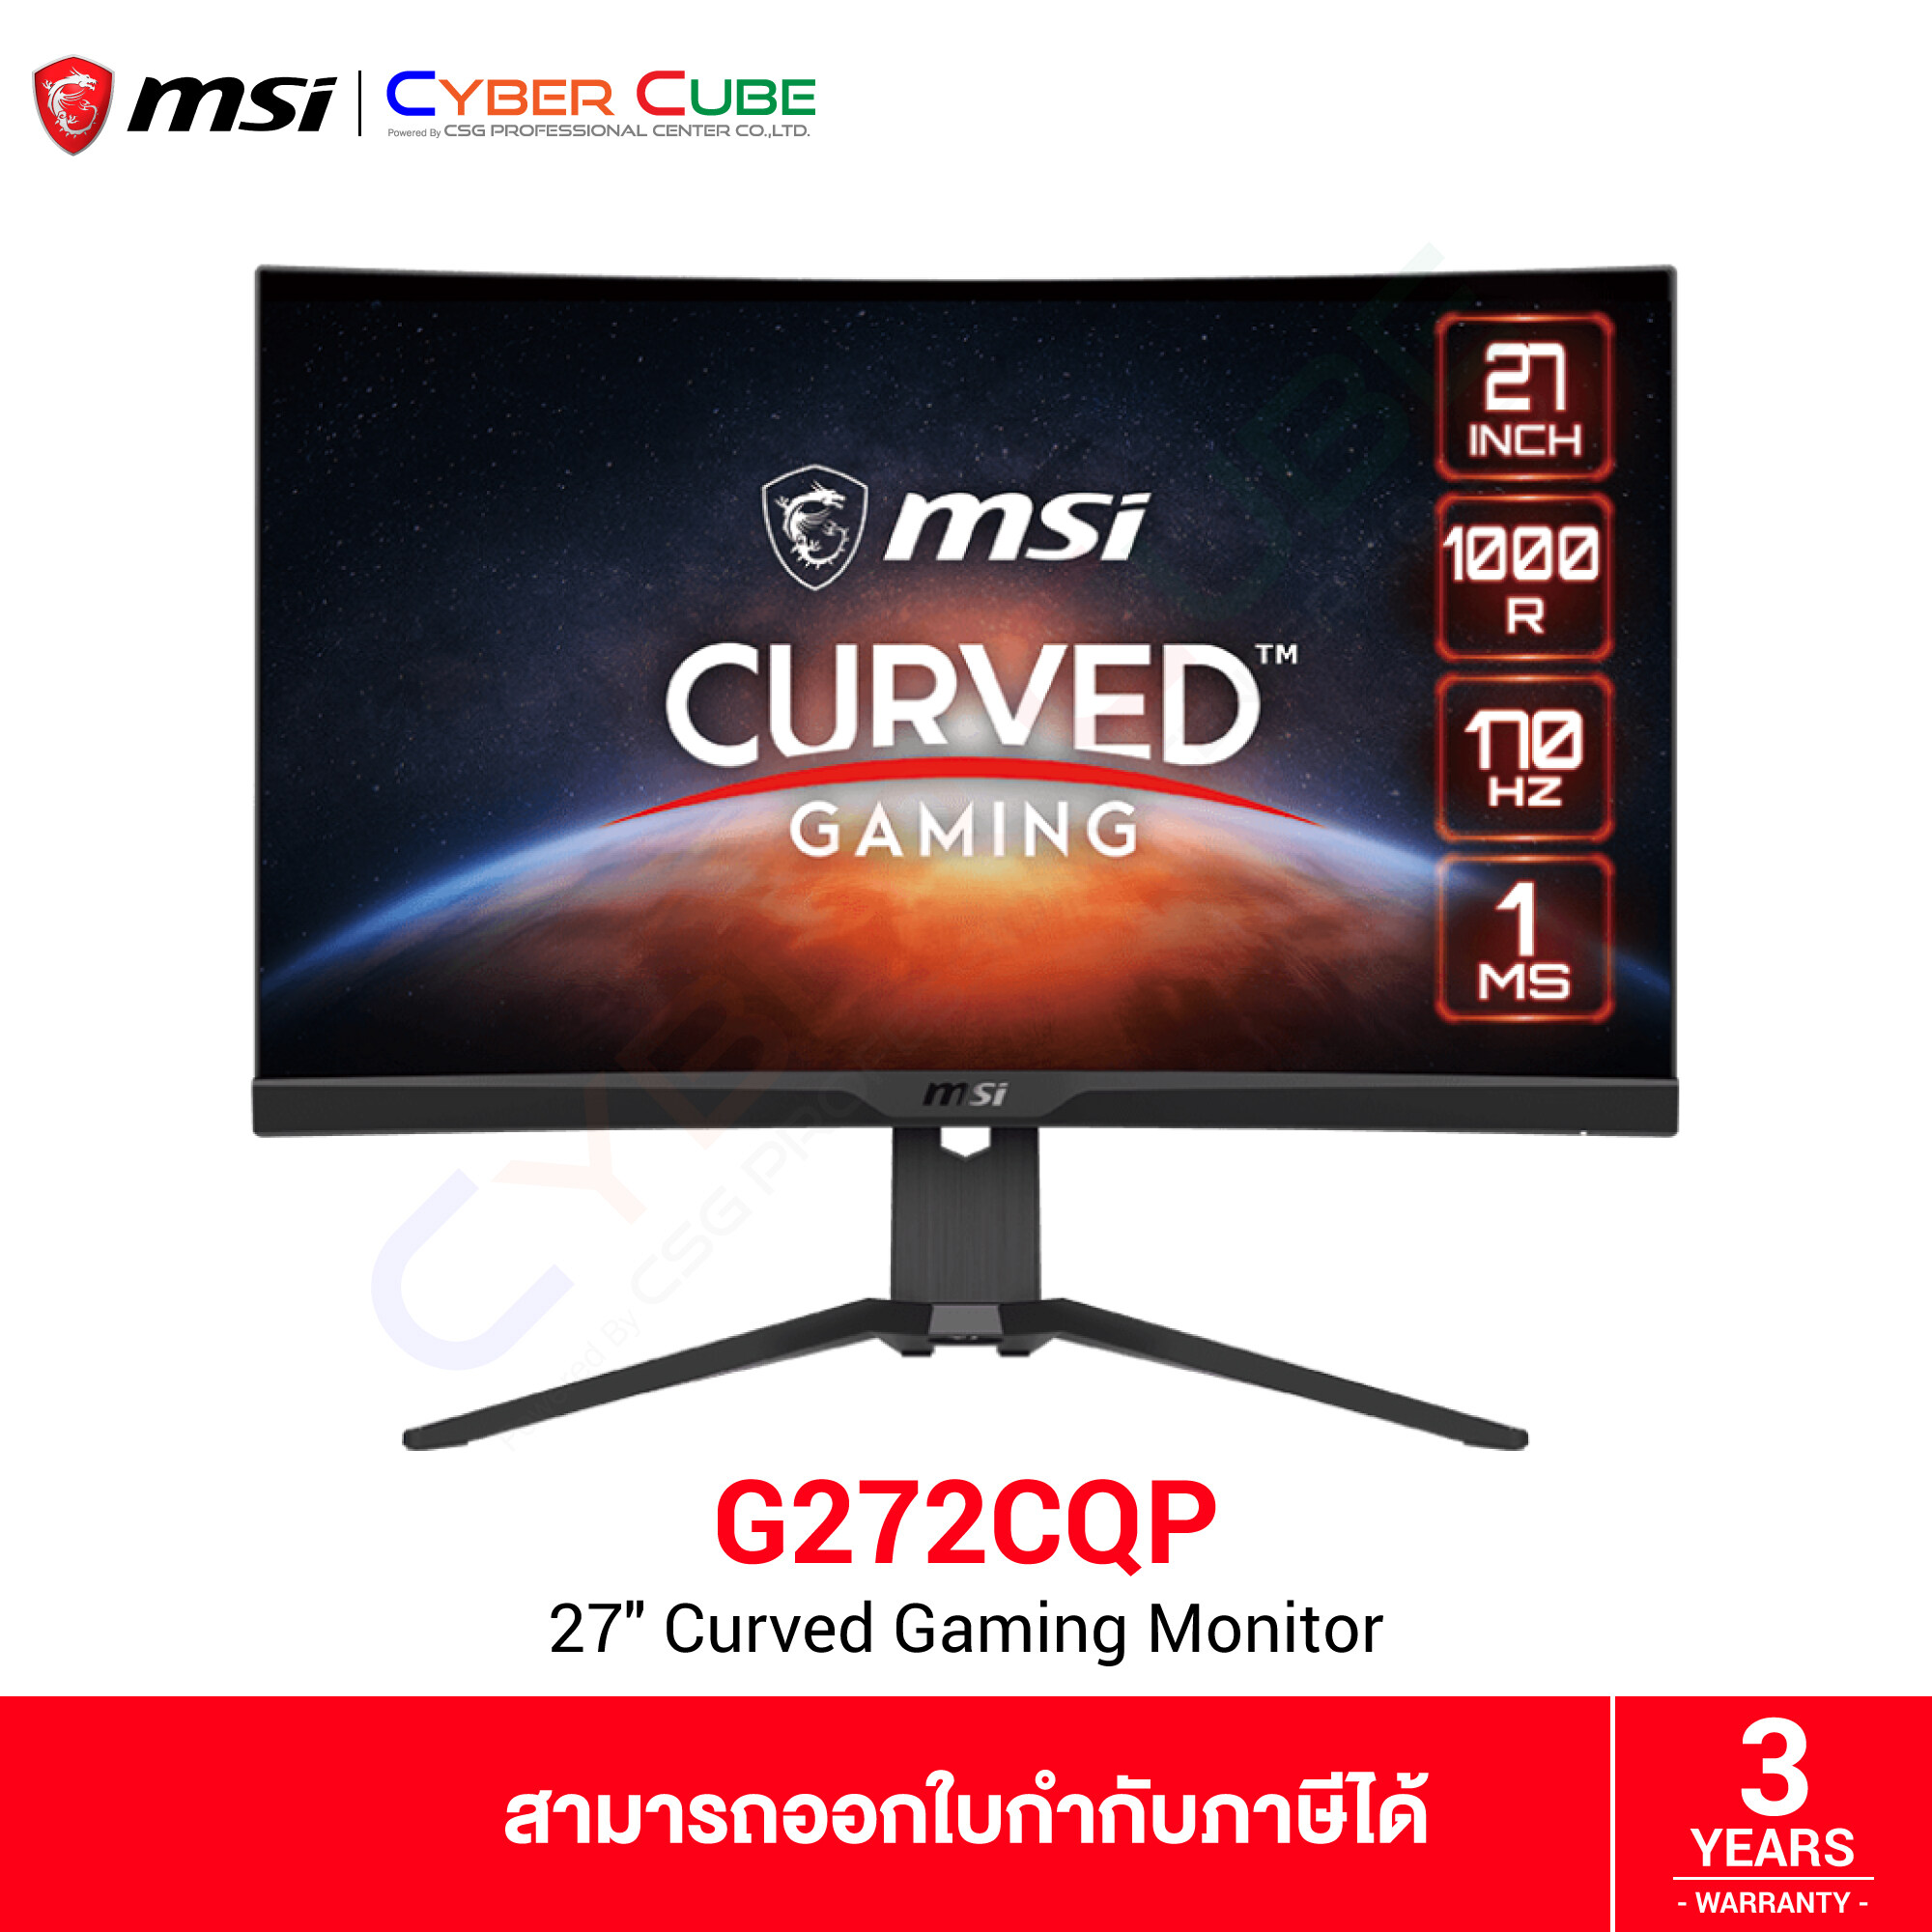 ASUS TUF Gaming 34 Inch Curved Gaming Monitor - WQHD (3440x1440) 165Hz ...